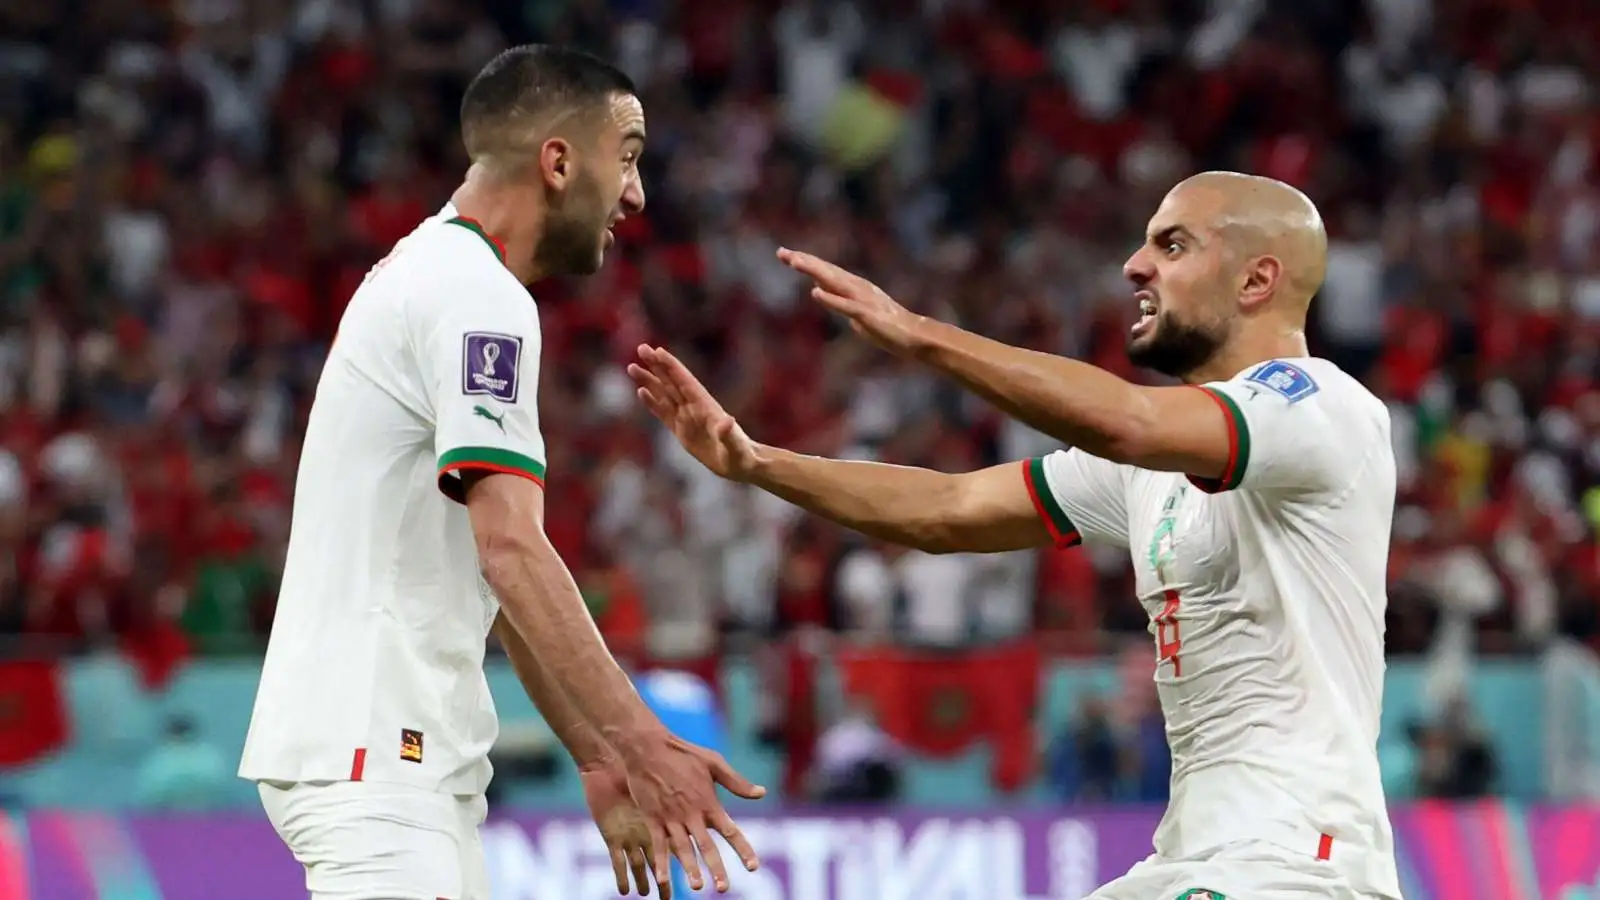 PSG Reportedly Interested in Signing Morocco's Star Sofyan Amrabat